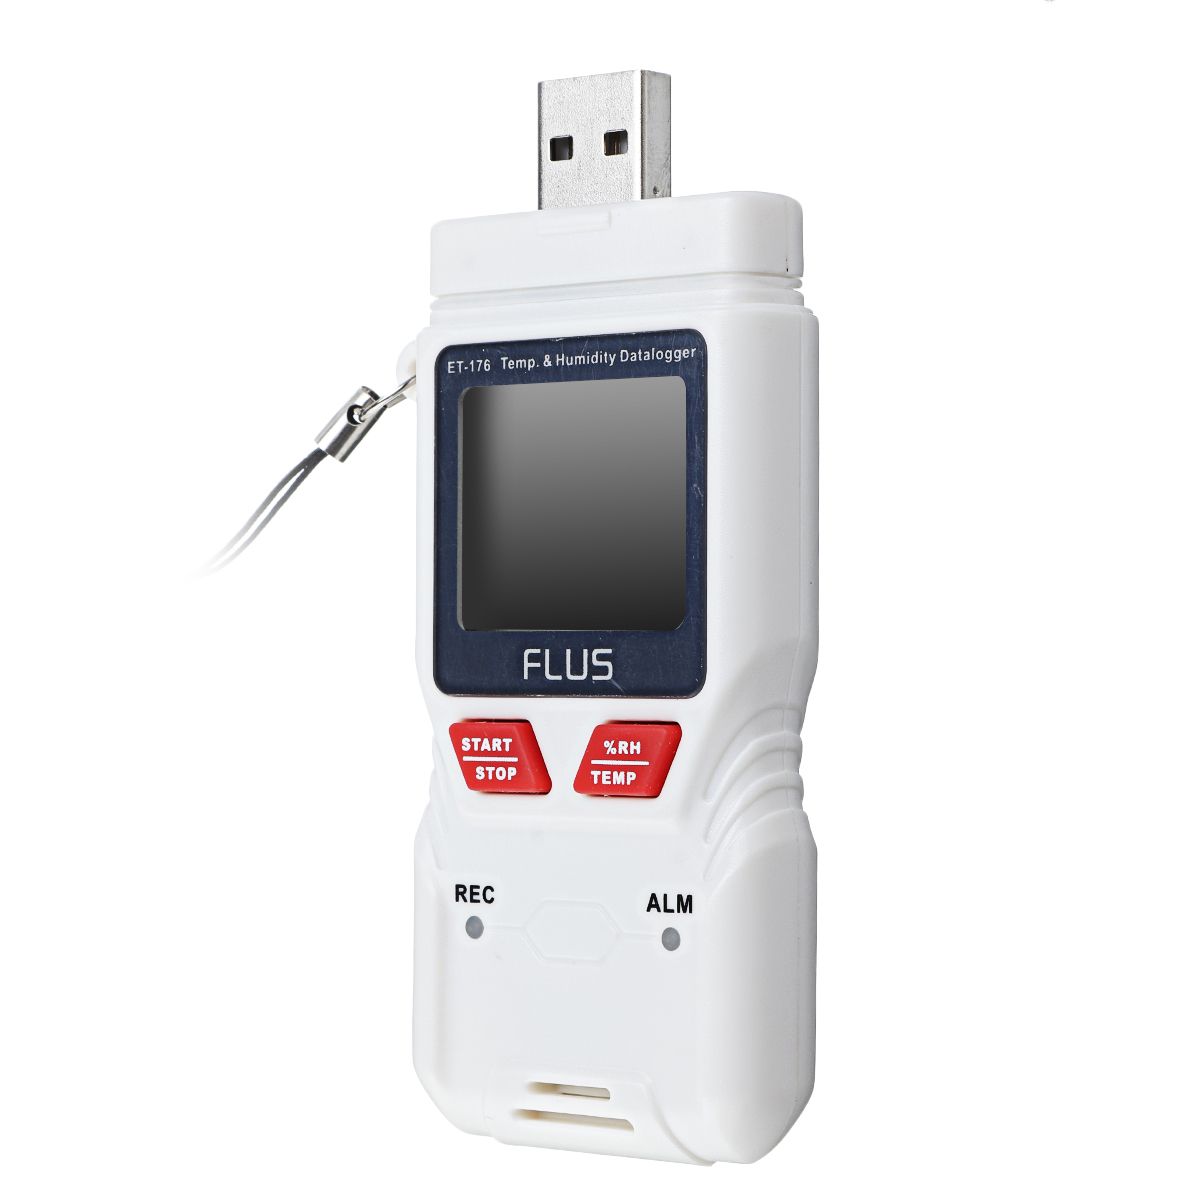 FLUS-ET-176-Temperature-and-Humidity-Datalogger-with-PDF-Report-USB-Interface-for-Set-up-and-Data-Tr-1756016